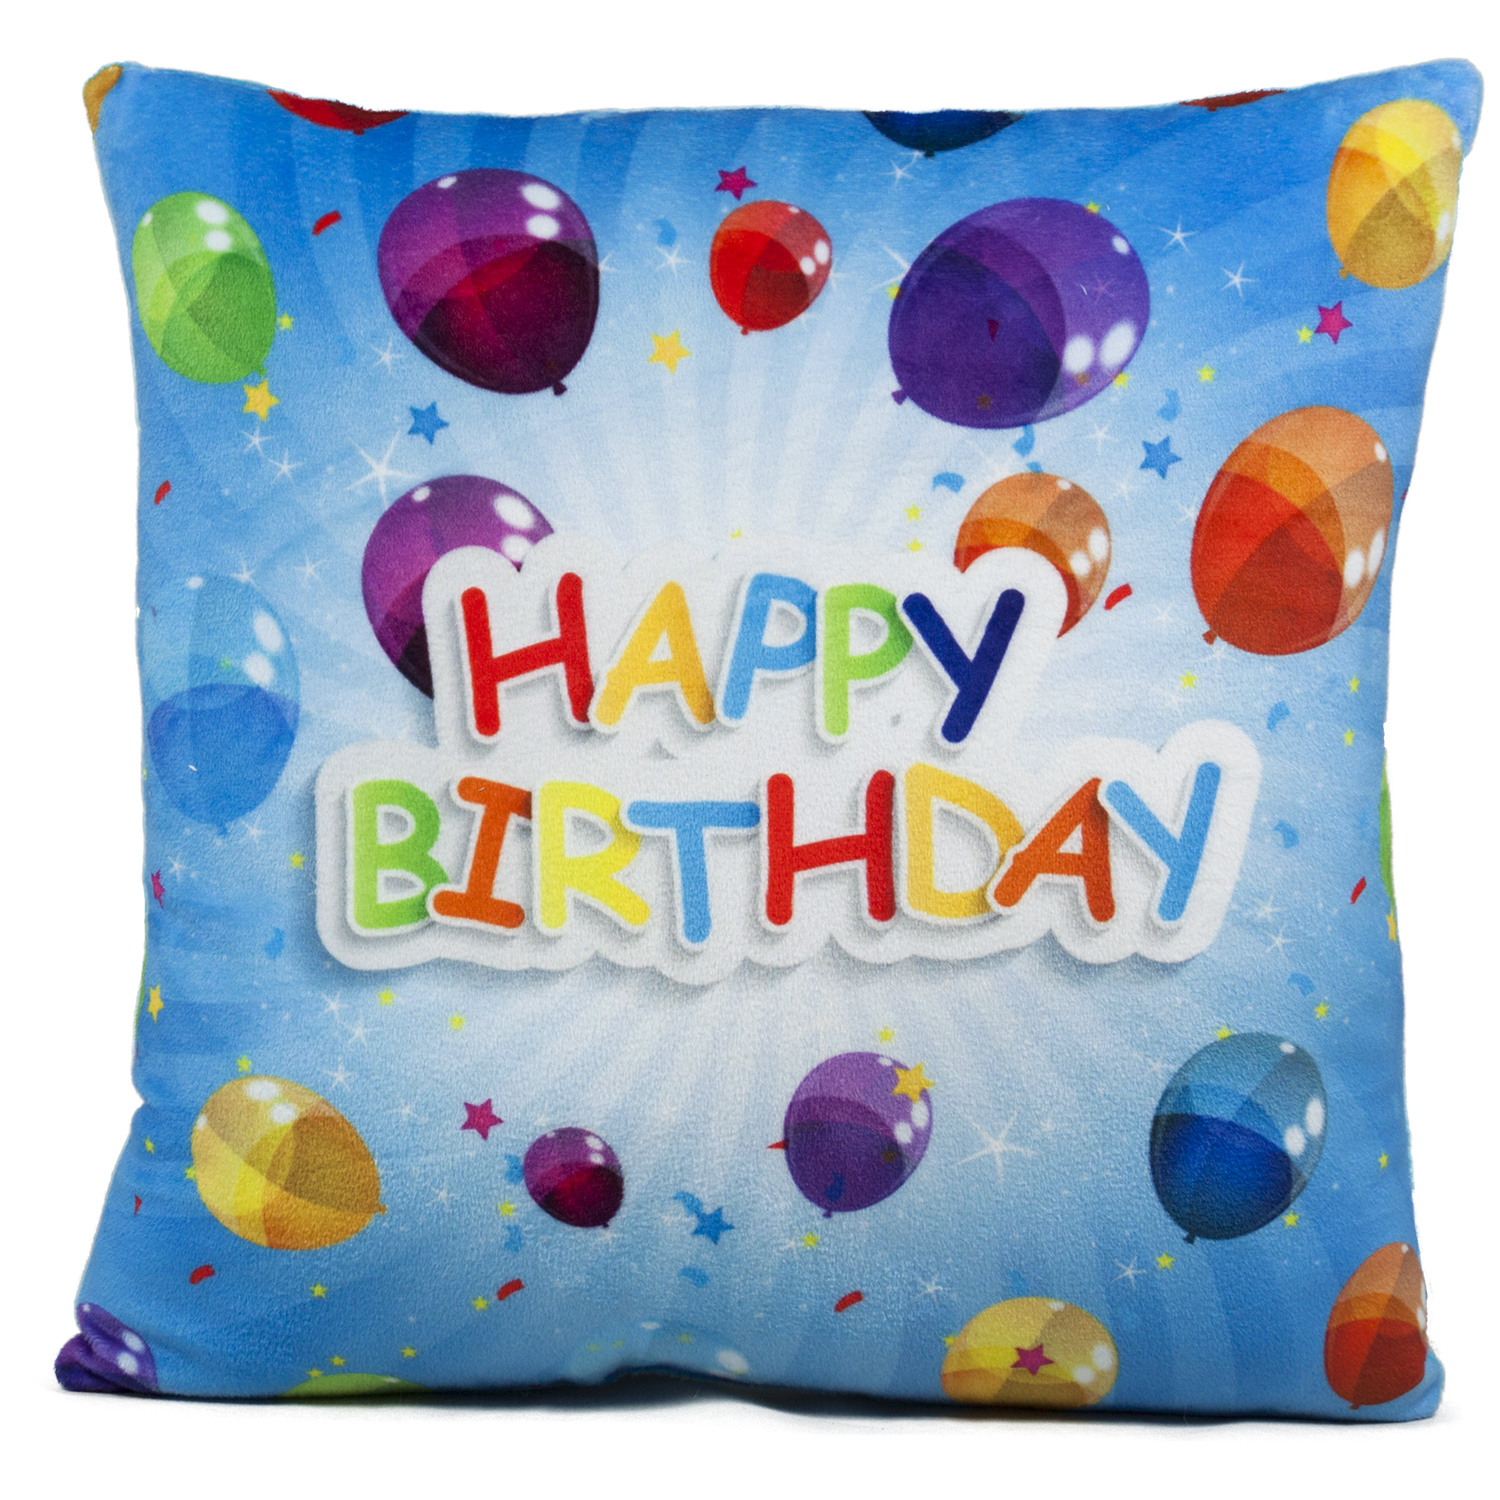 Pillow Happy Birthday with balloons